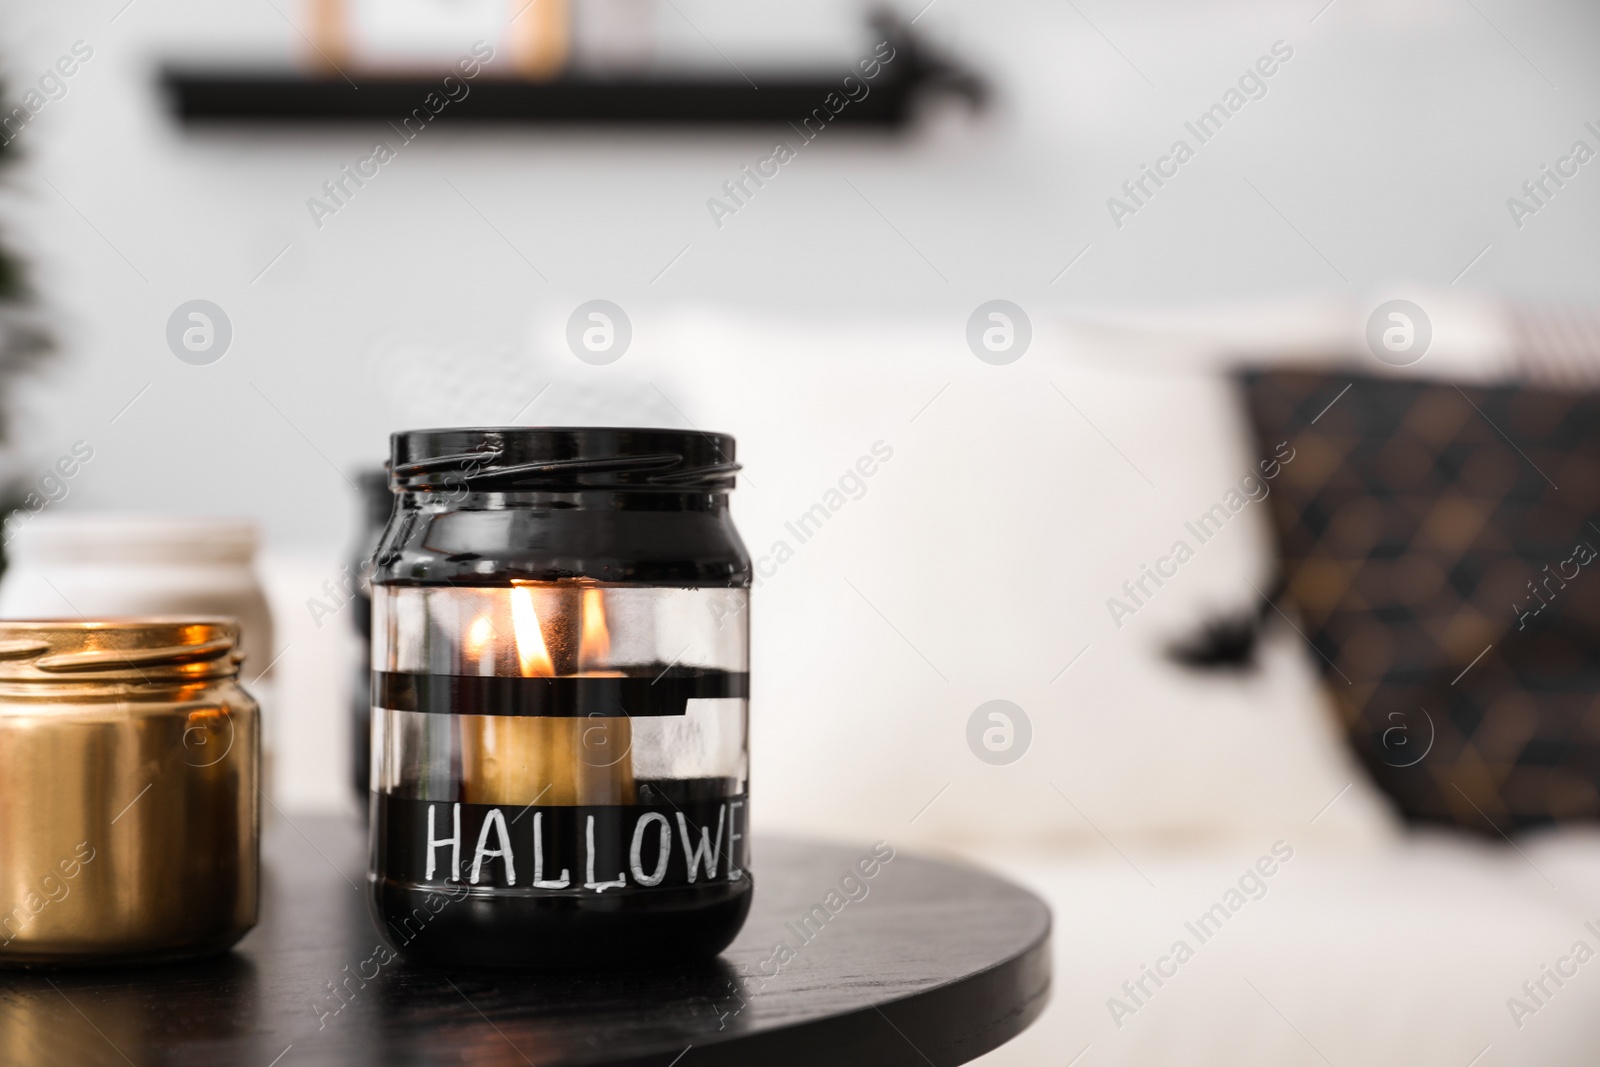 Photo of Burning candles on table in room. Idea for Halloween interior